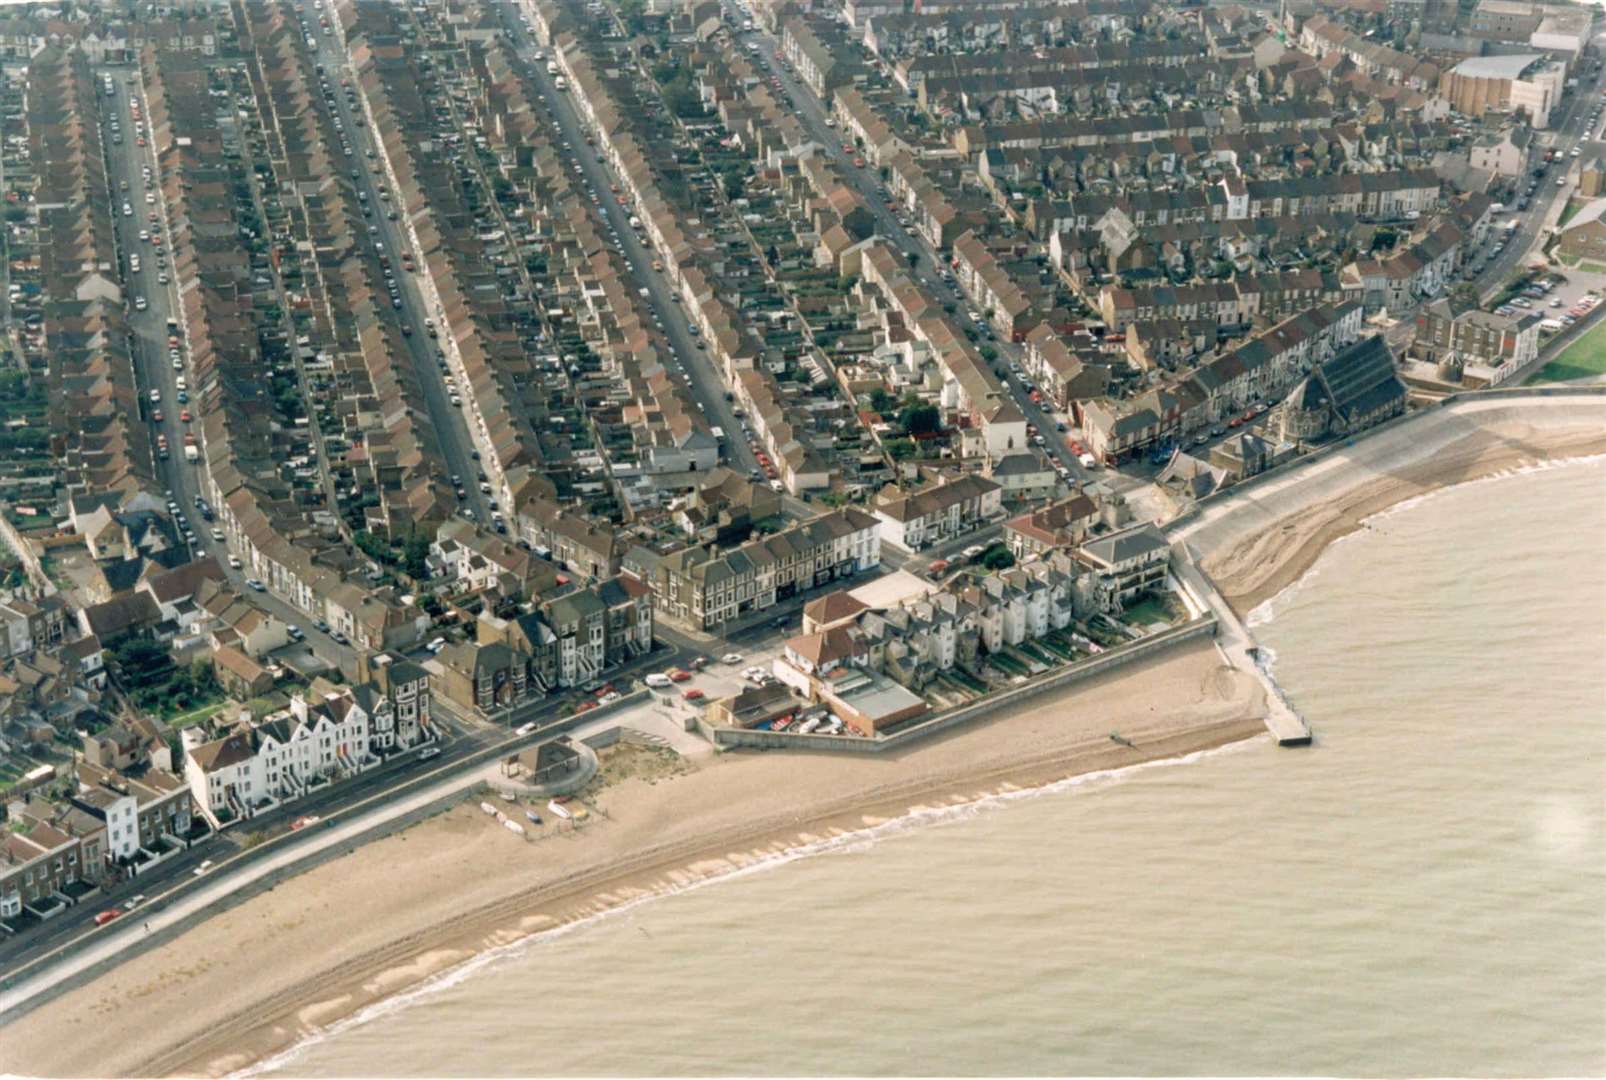 Sheerness seafront in 1992